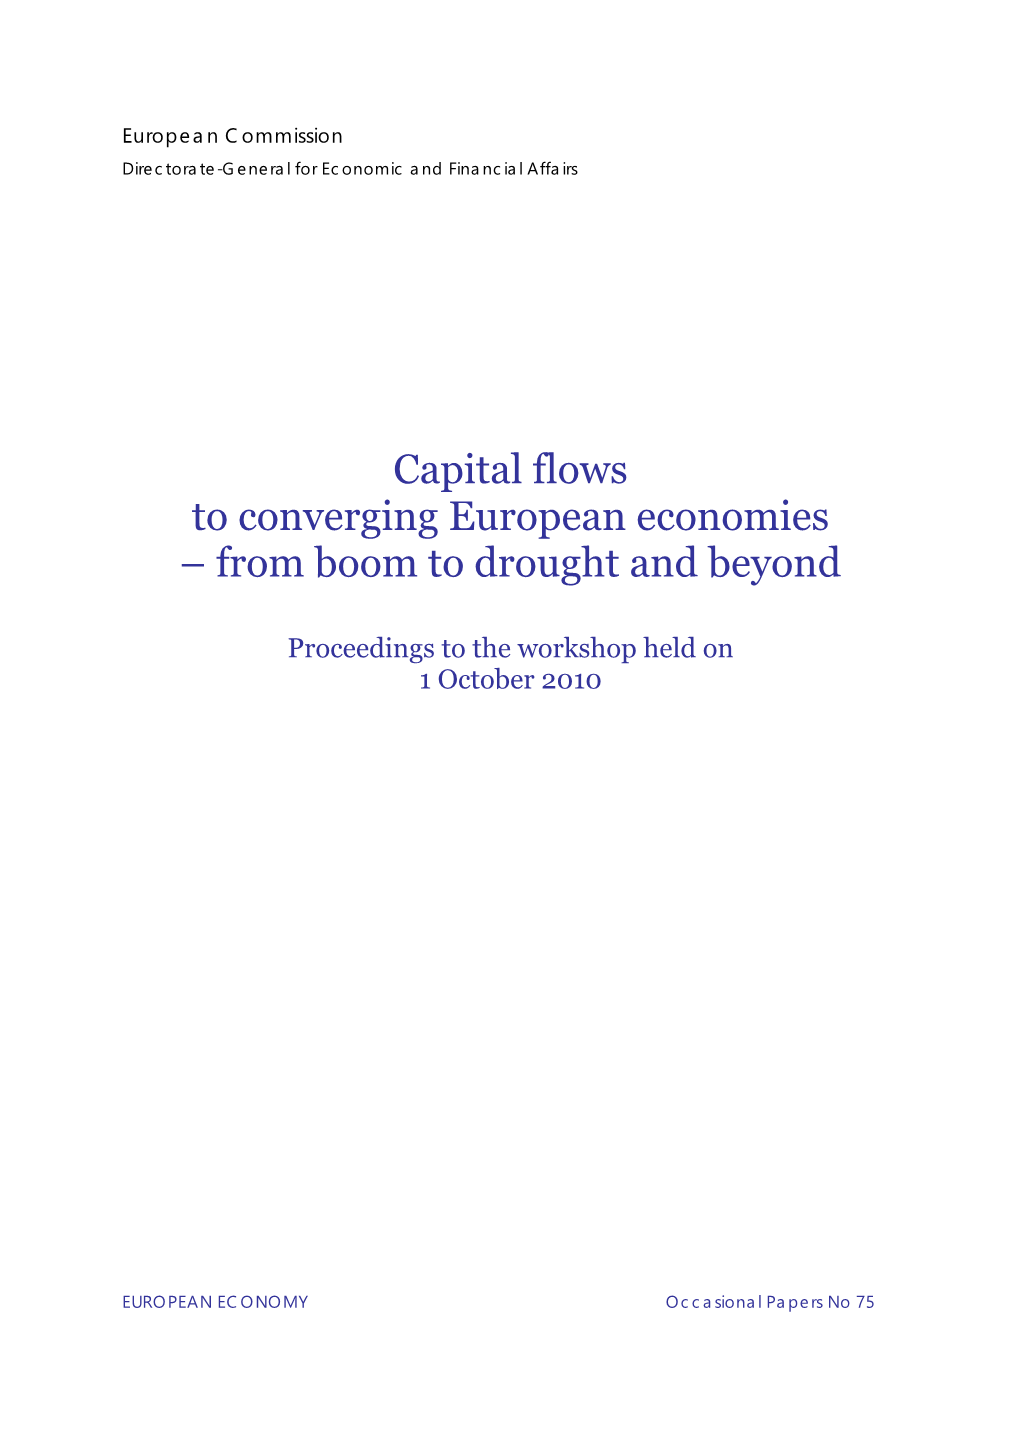 Capital Flows to Converging European Economies – from Boom to Drought and Beyond